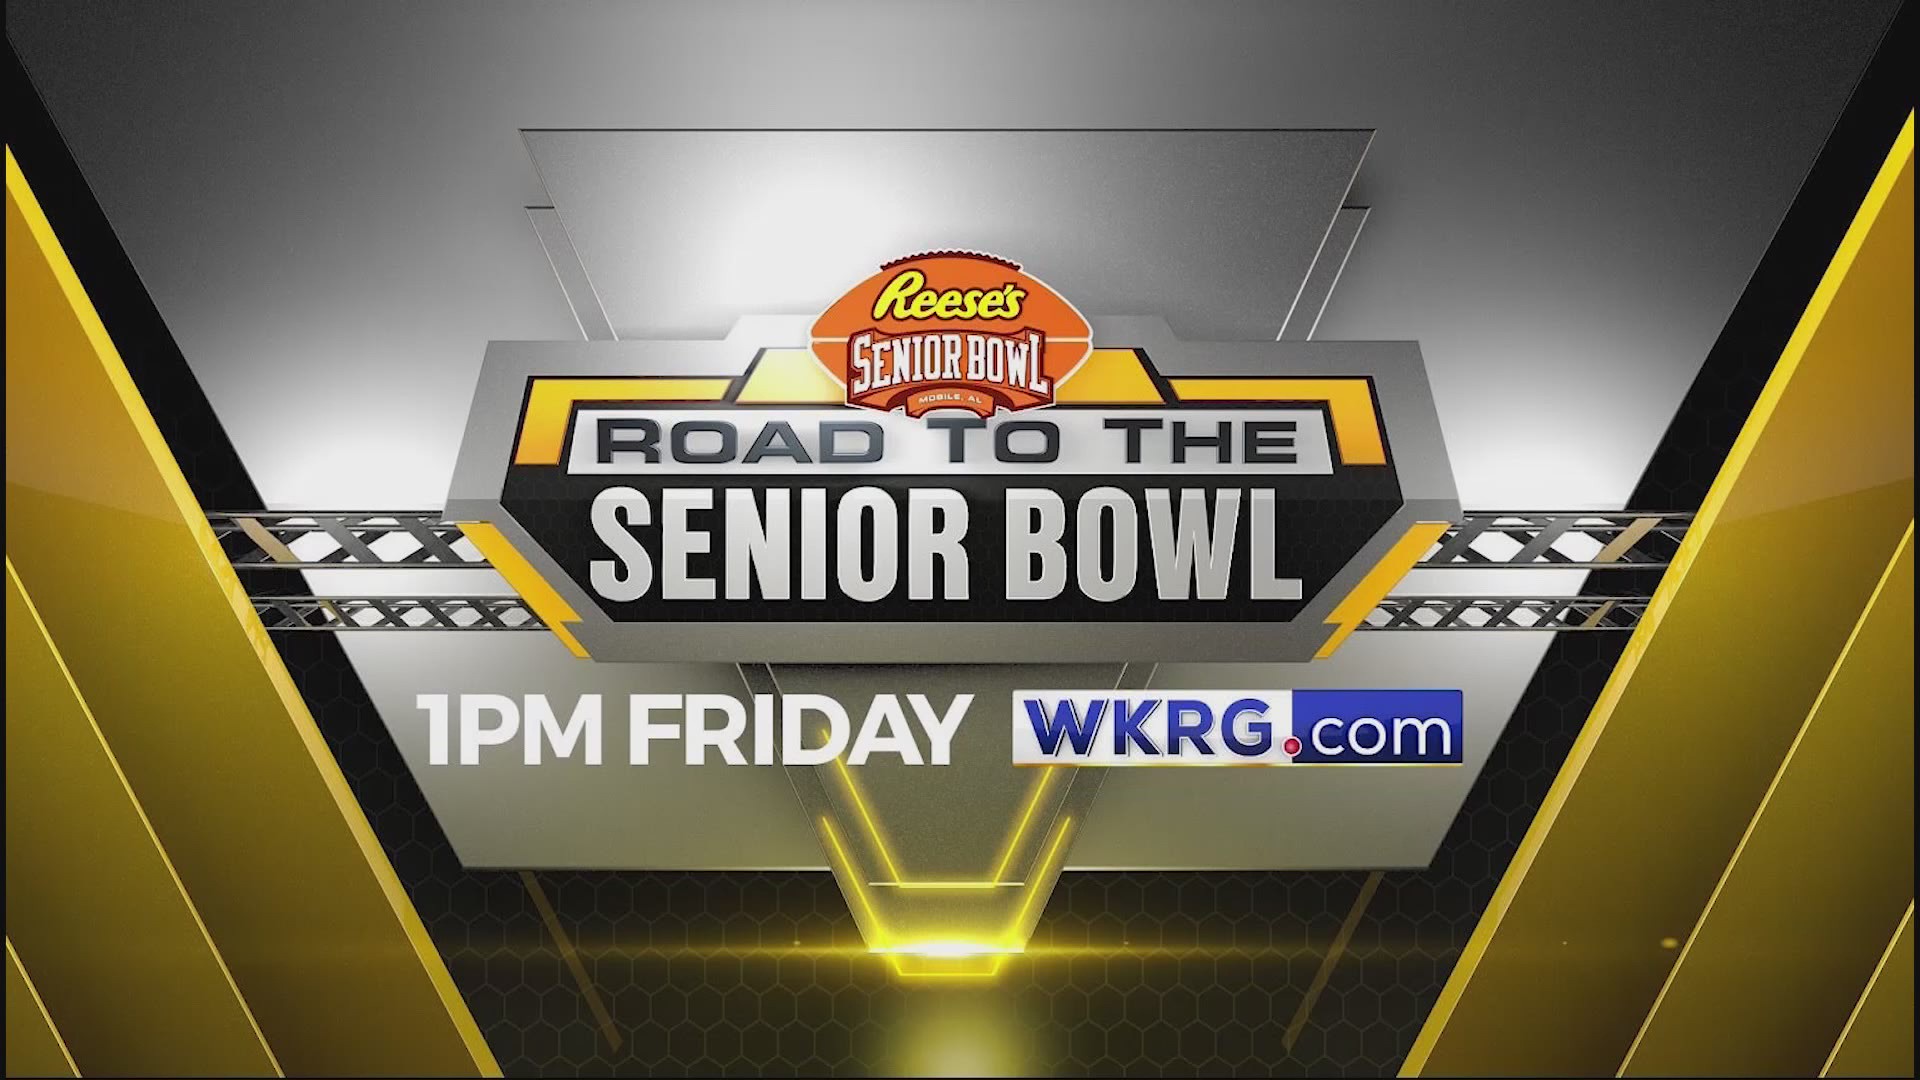 Thumbnail for the video titled "Road to the Senior Bowl 2020"